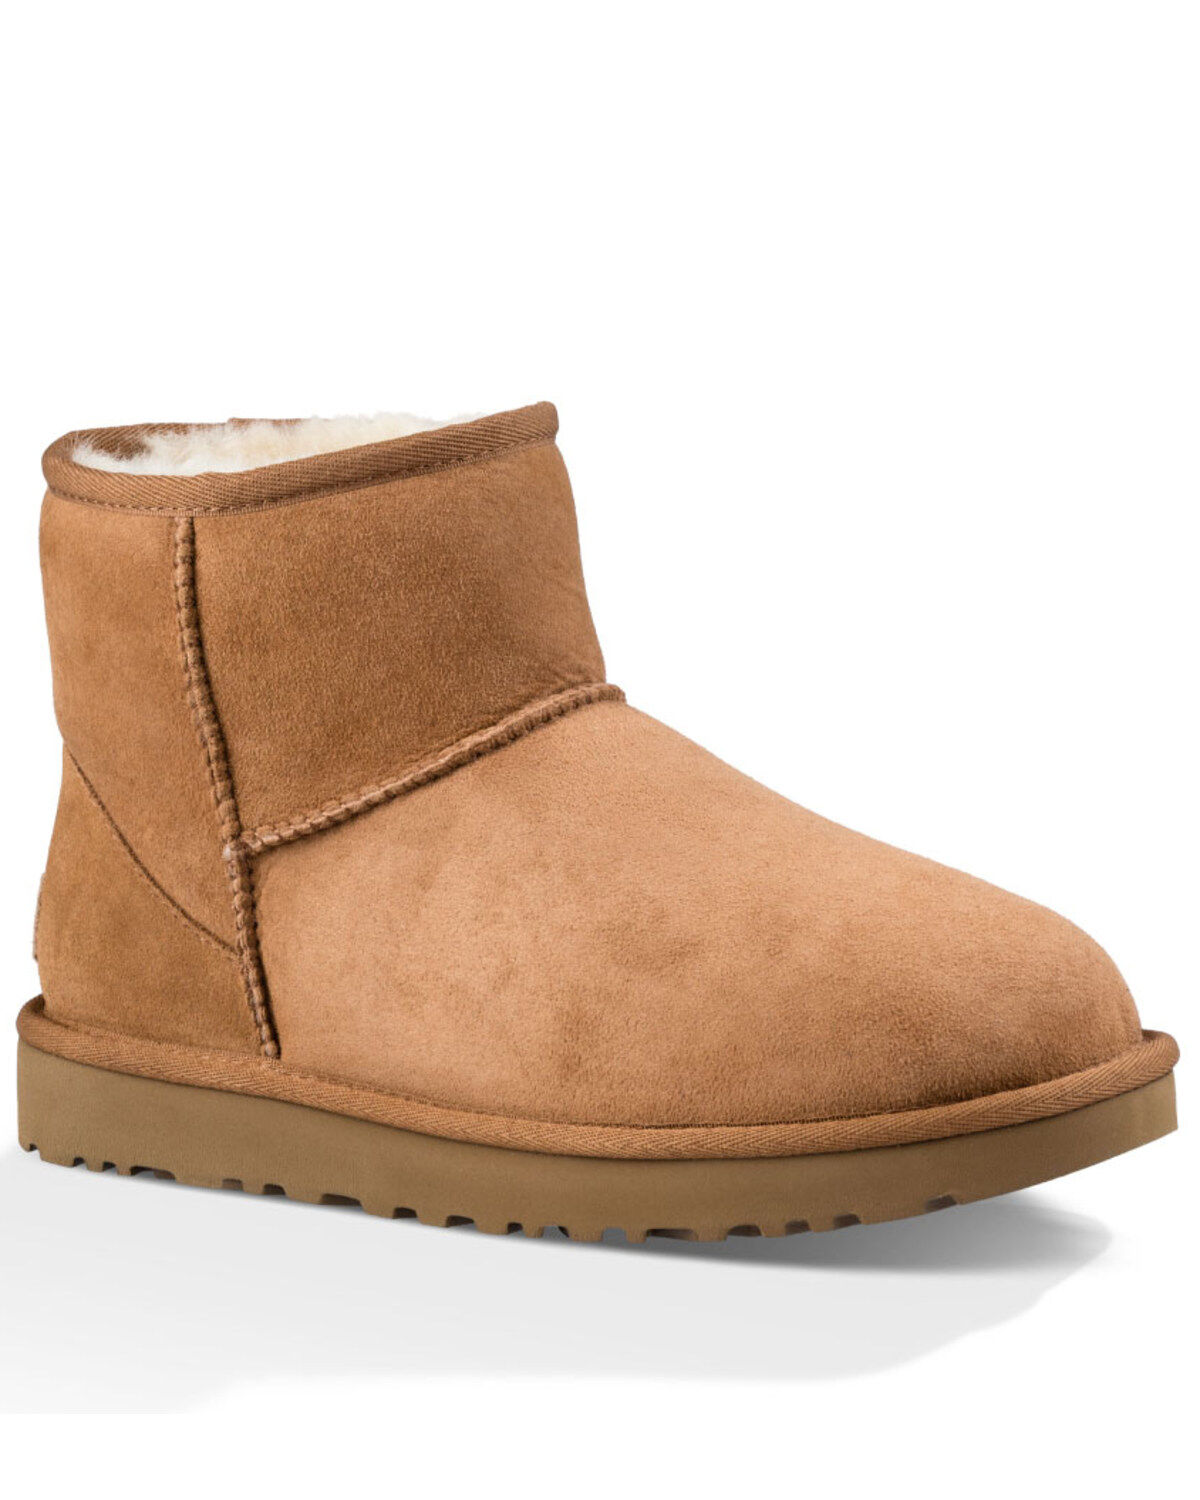 uggs for cheap near me